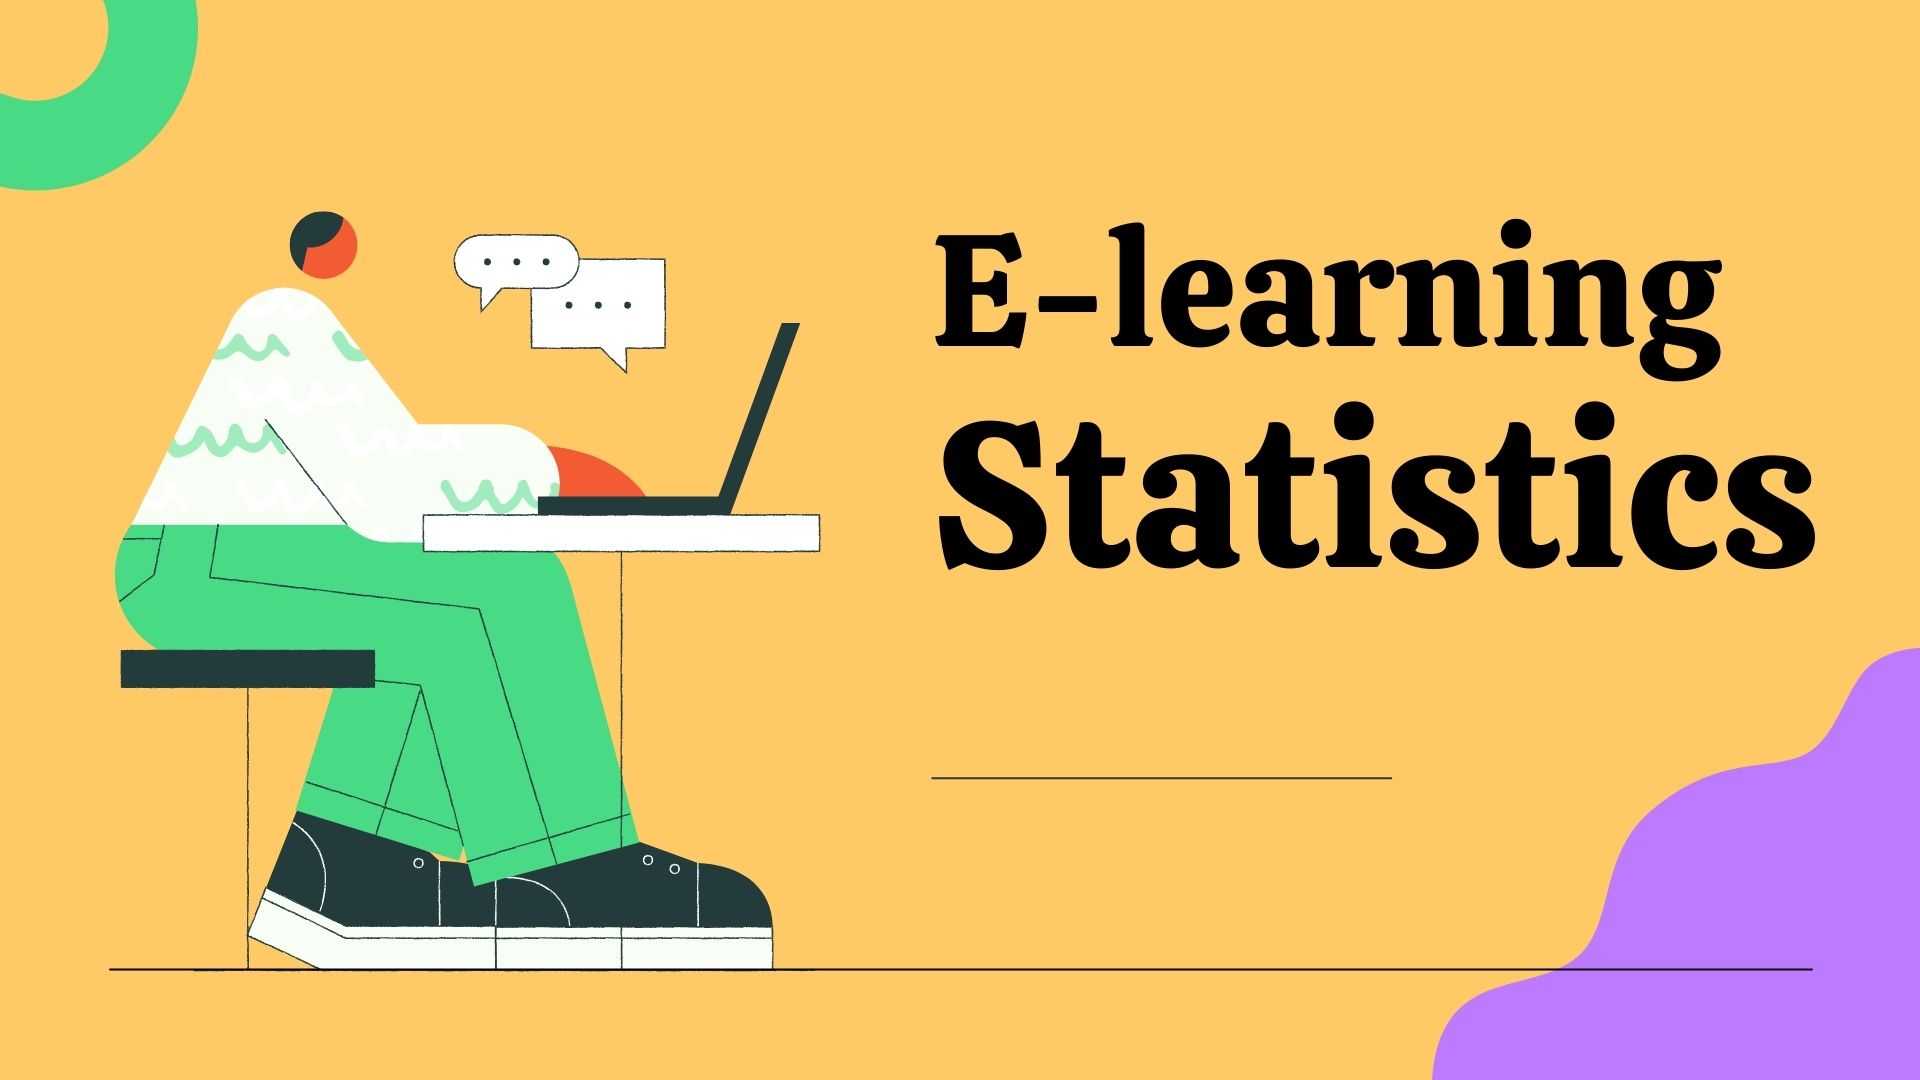 E-learning Statistics 2022: Surprising Facts About Online Learning Statistics